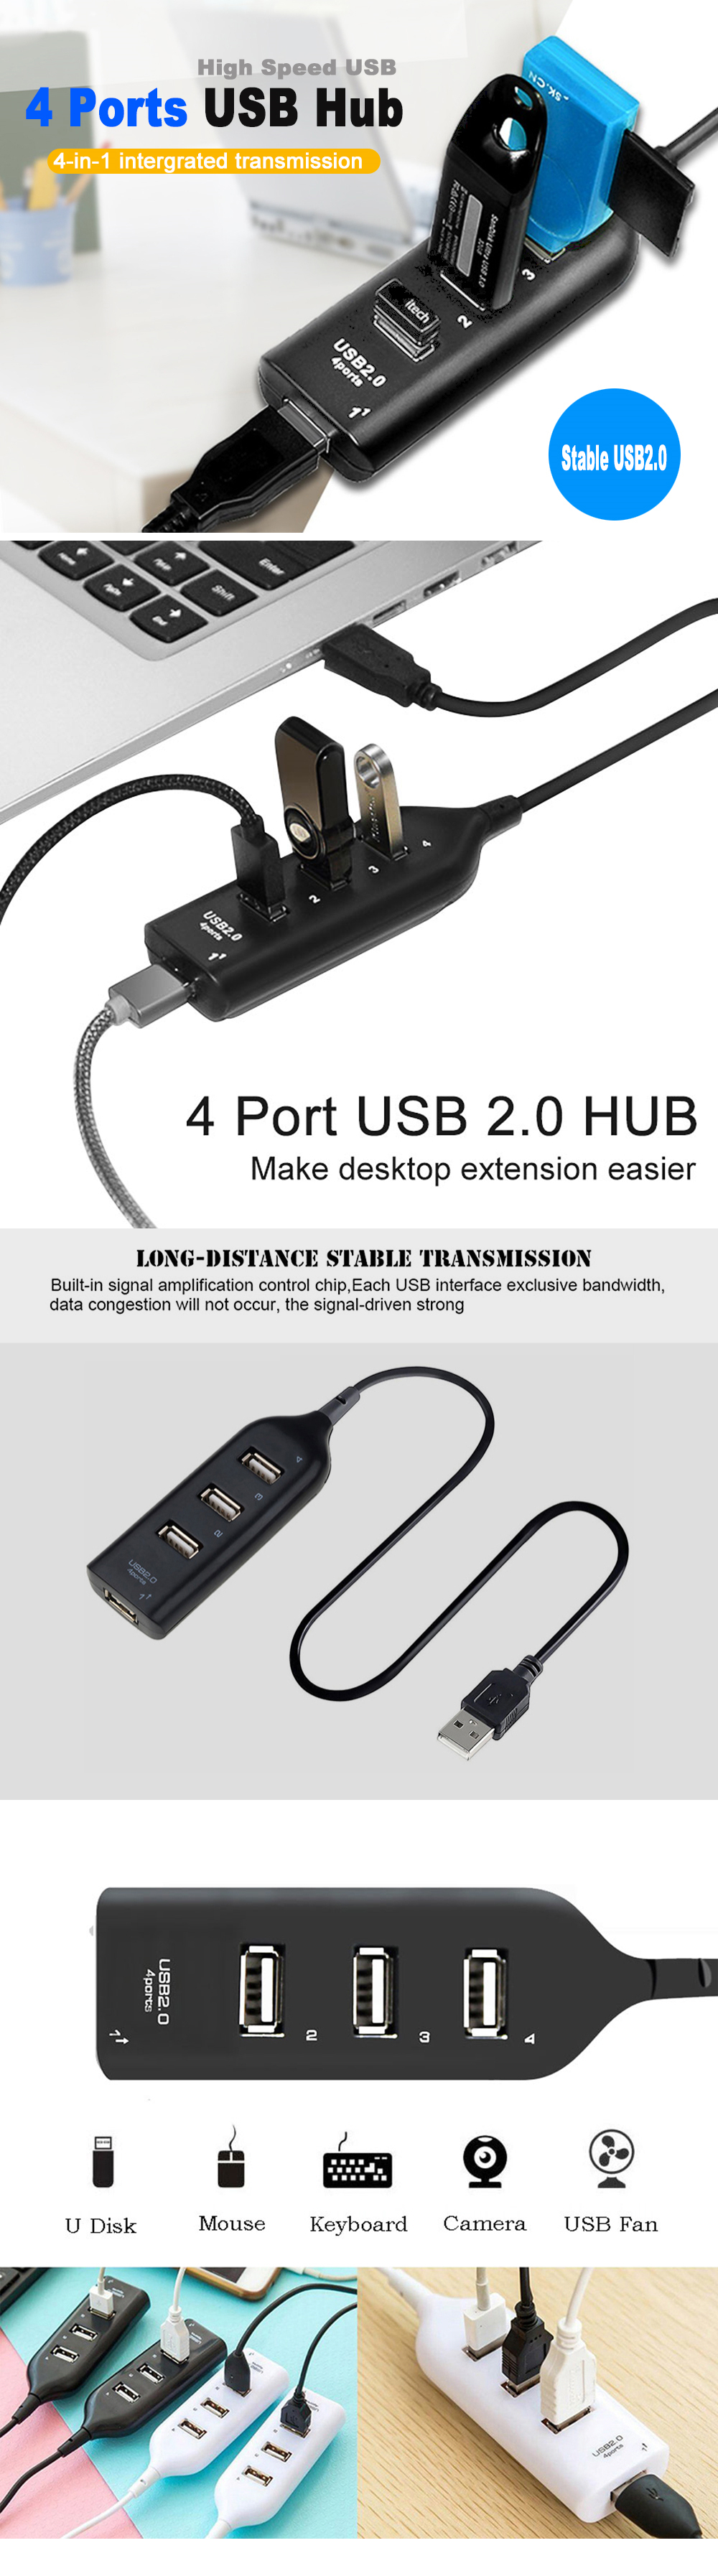 USB Hub 4 Port USB 2.0 with Cable High Speed Hub Socket Adapter for Laptop PC - Black